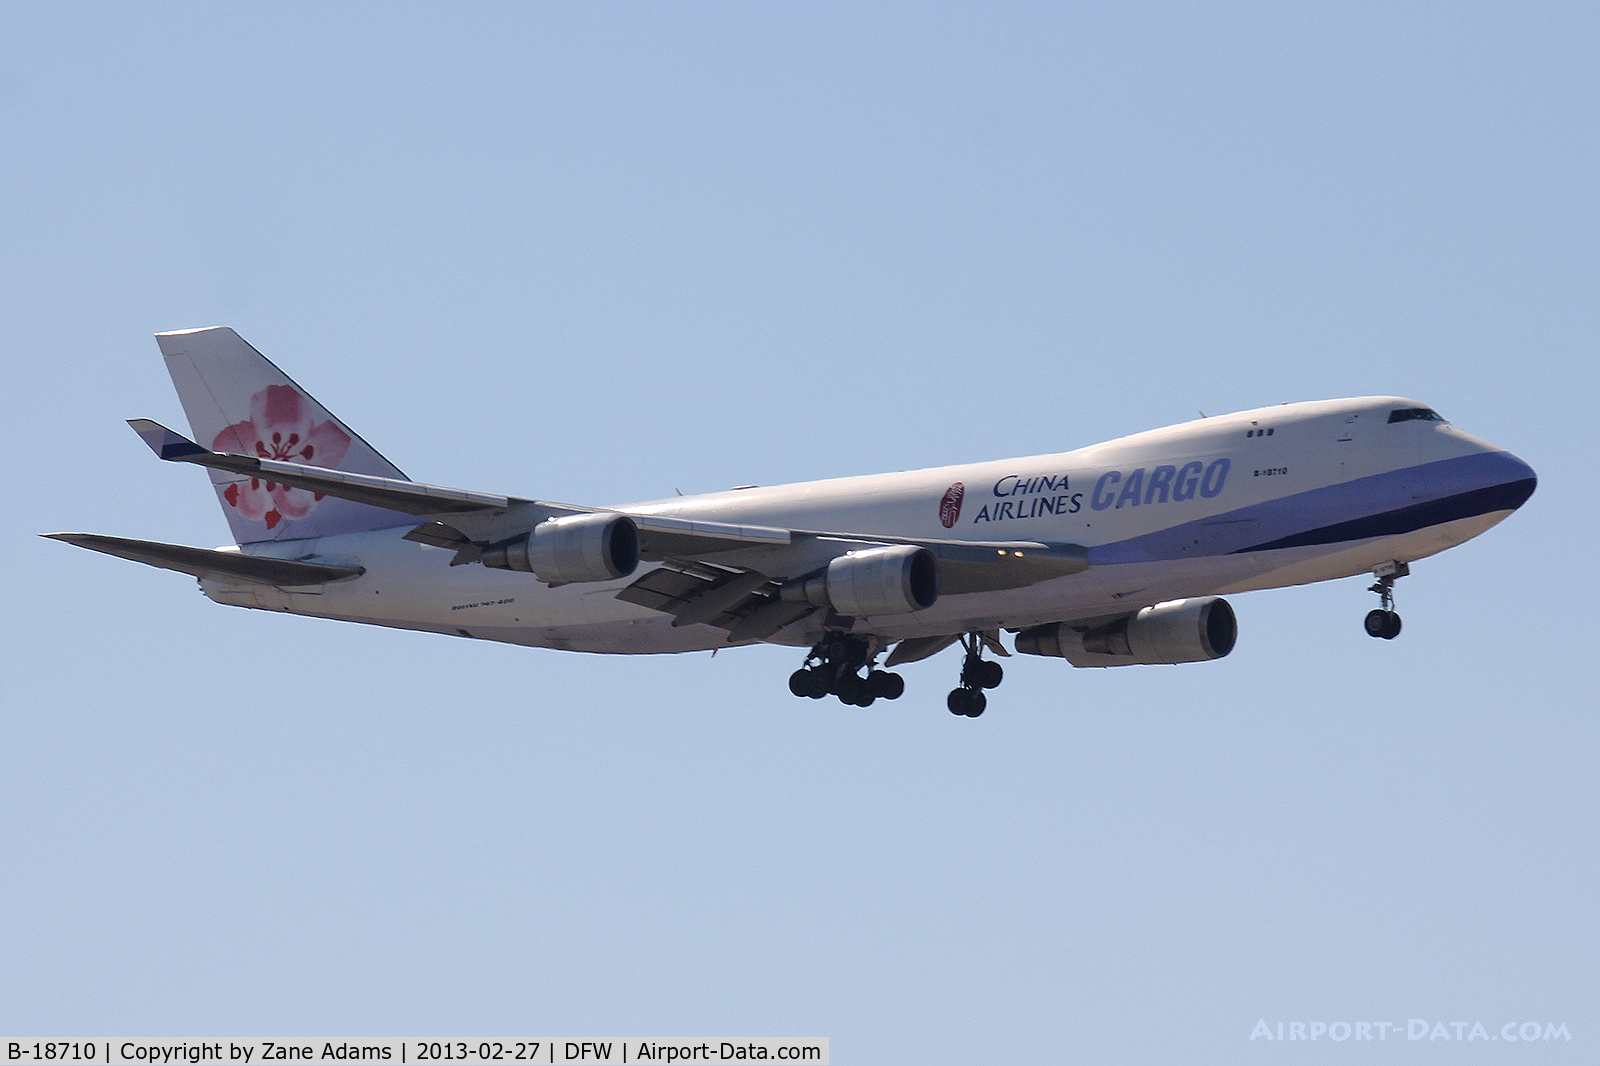 B-18710, 2002 Boeing 747-409F/SCD C/N 30767, China Airlines Cargo 747 at DFW Airport